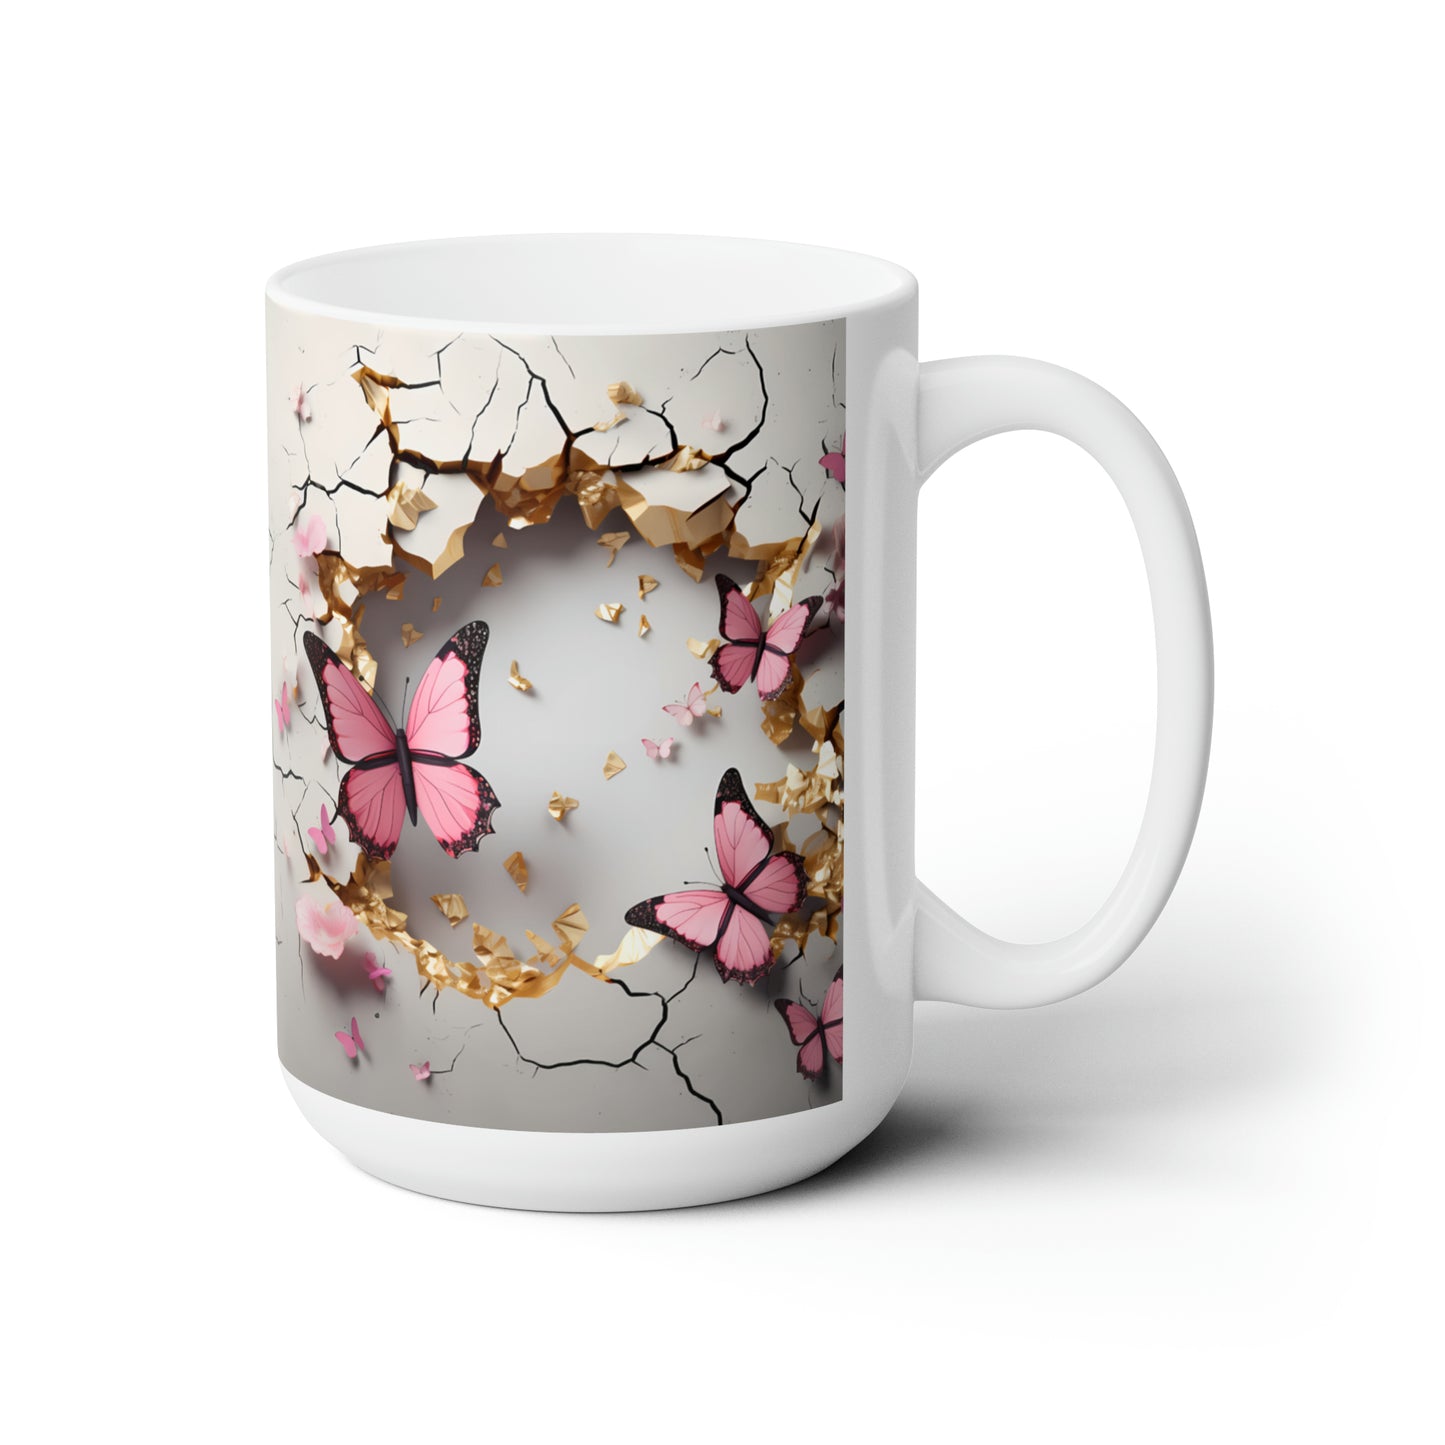 3D Crack In A Wall Pink Butterfly, Butterfly coffee mug, Mug design, Mug wrap, 3D mug wrap, butterfly mug, Ceramic Mug 15oz